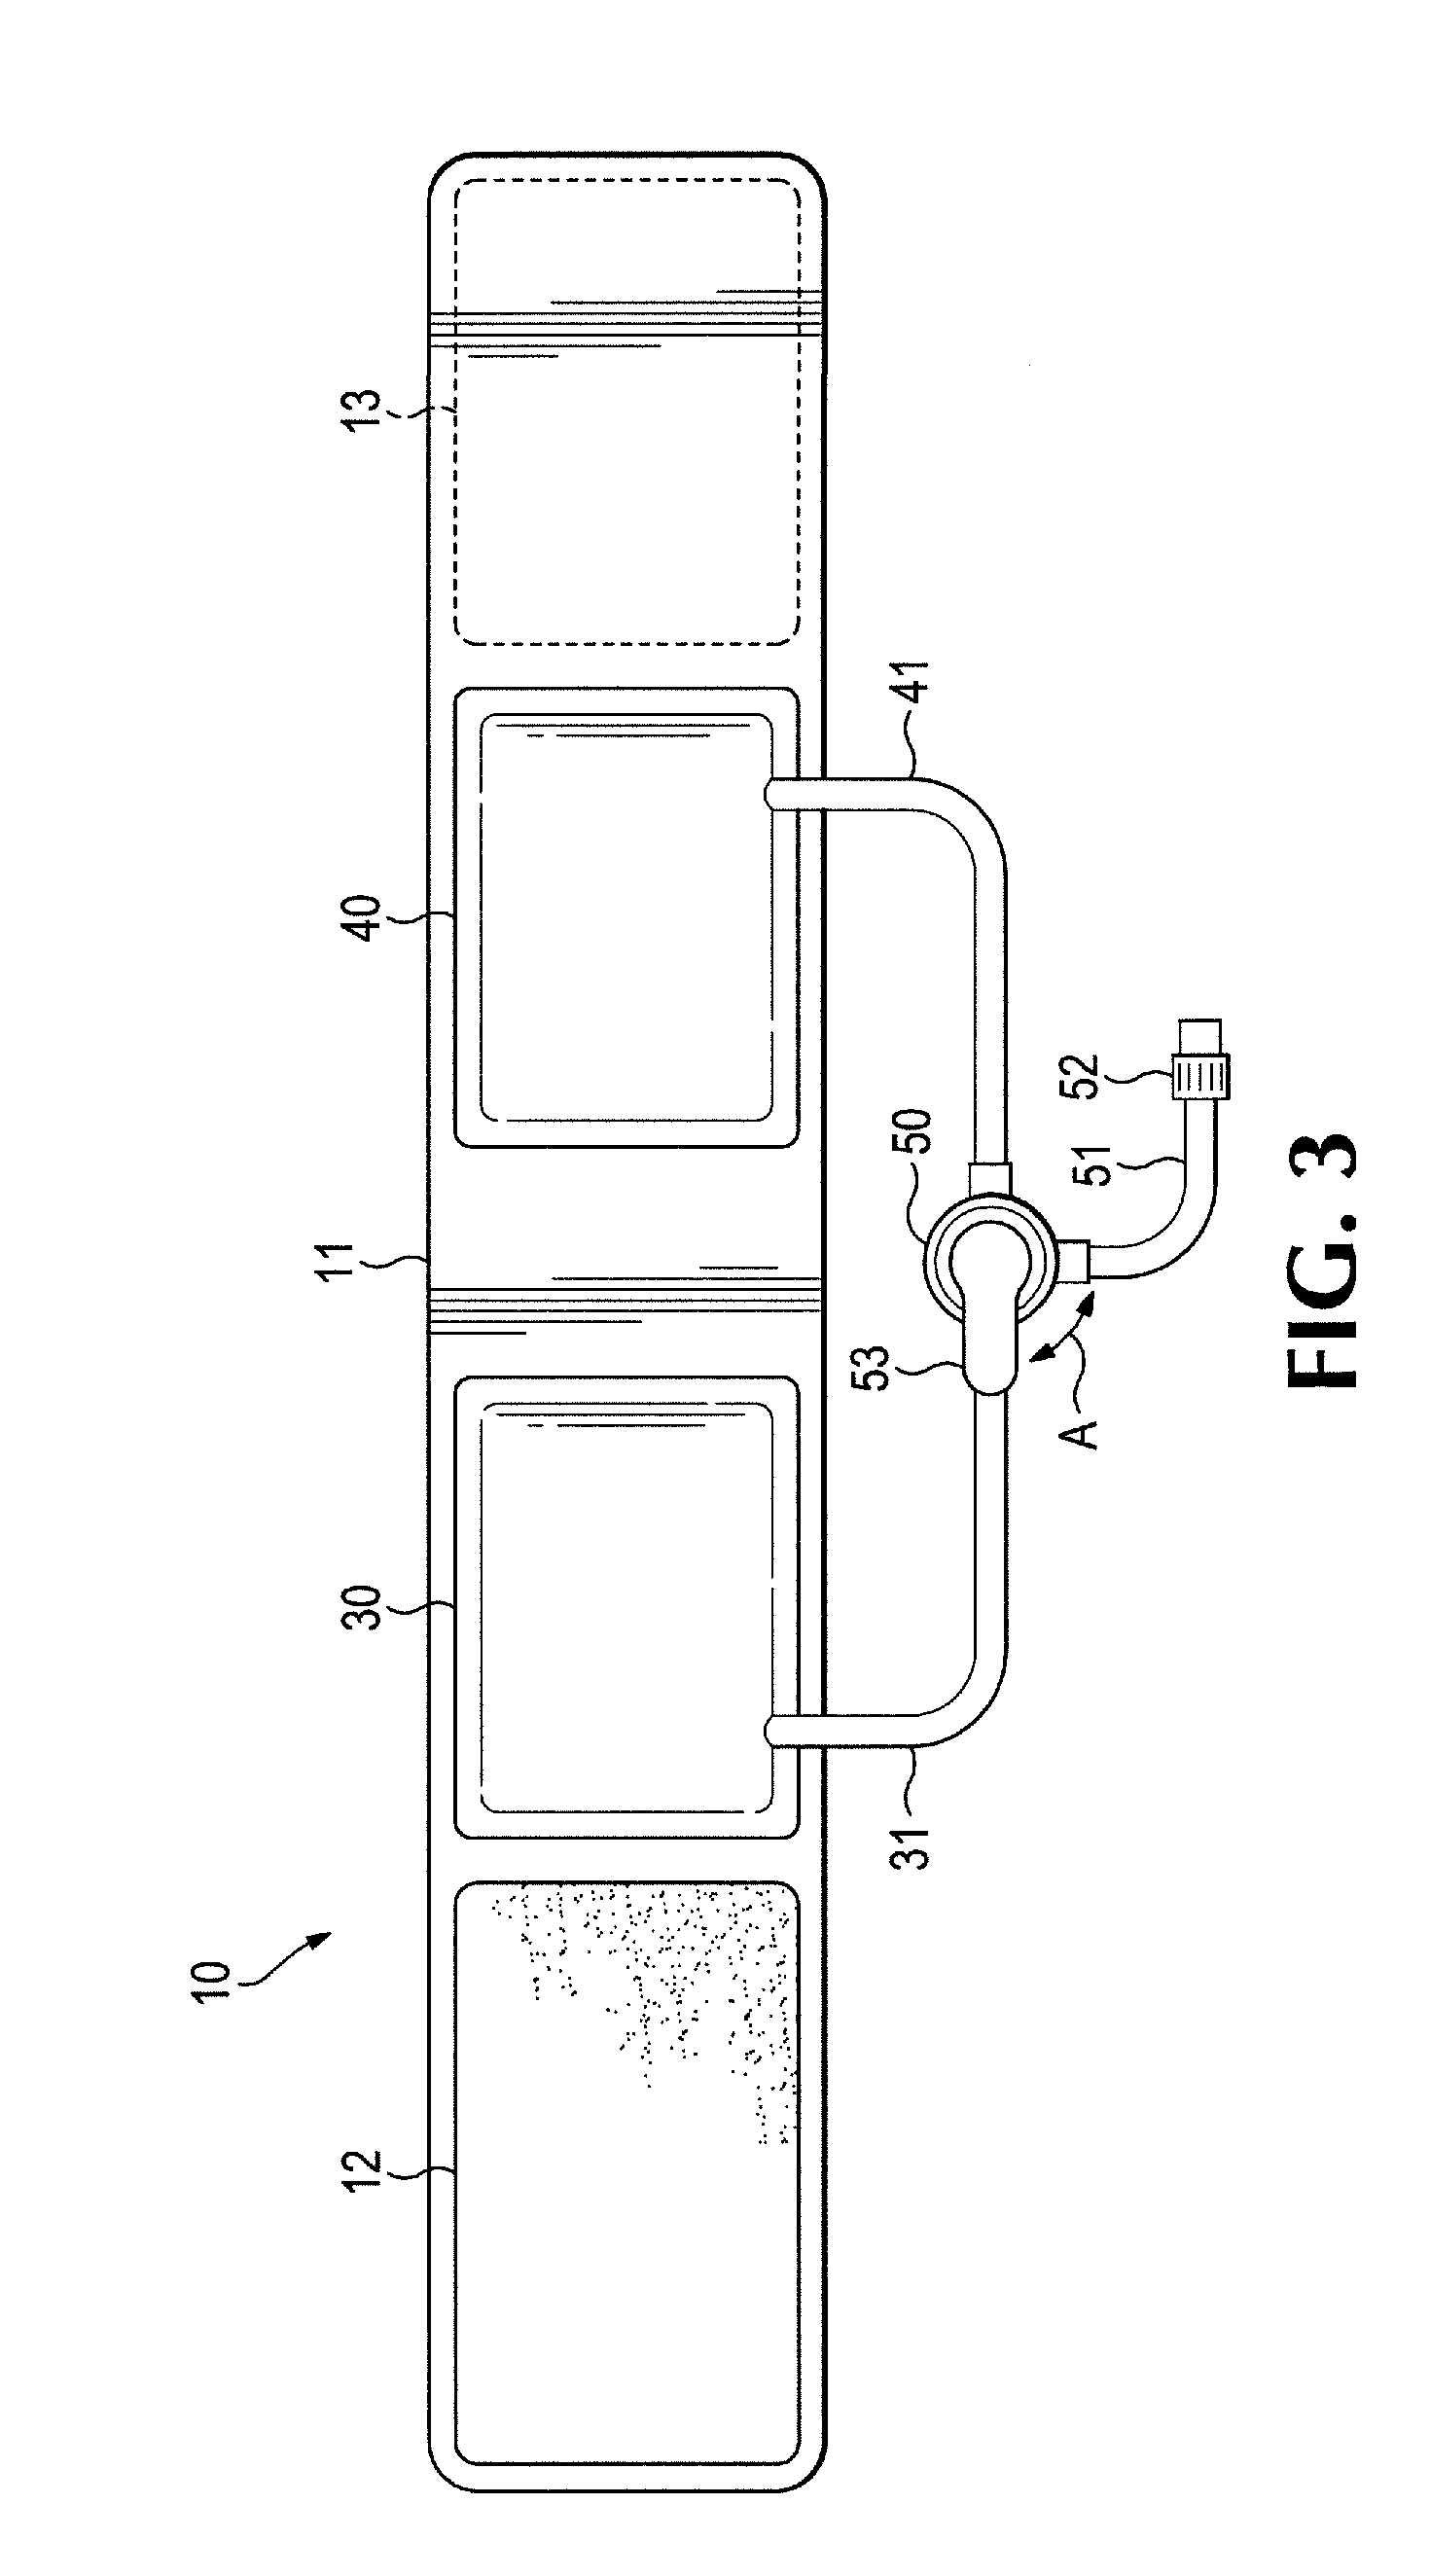 Apparatus and method of use for an adjustable radial and ulnar compression wristband